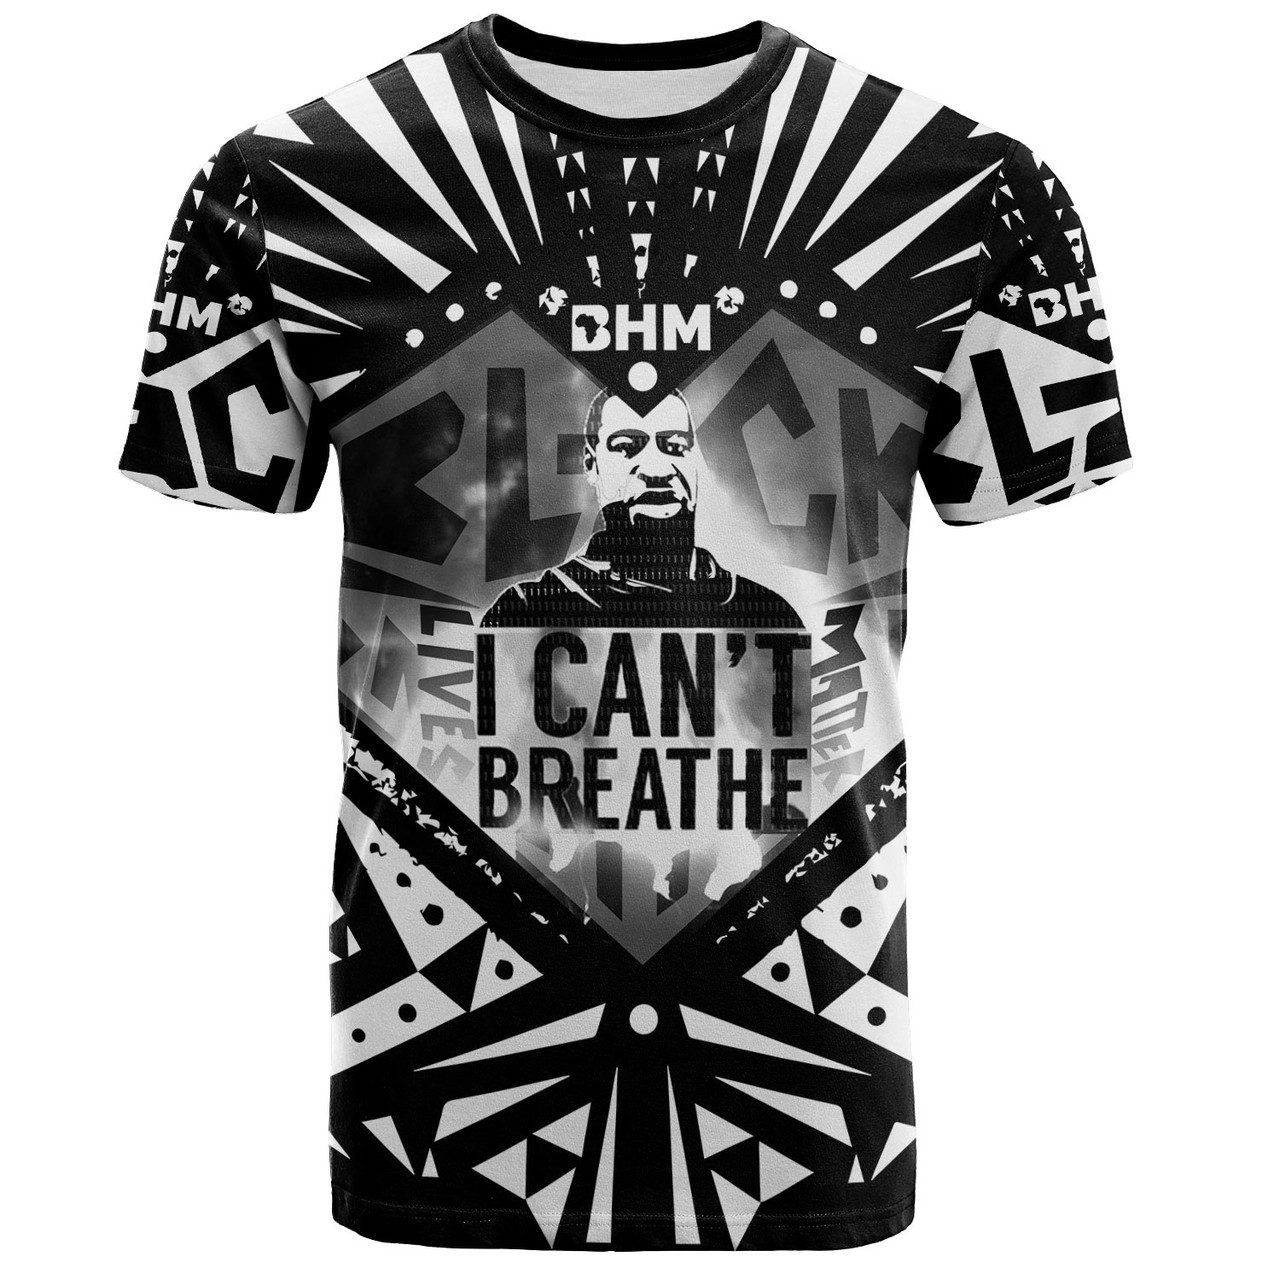 African Black History Month T-shirt – “I Can’t Breath” In Memory of George Floyd T-shirt